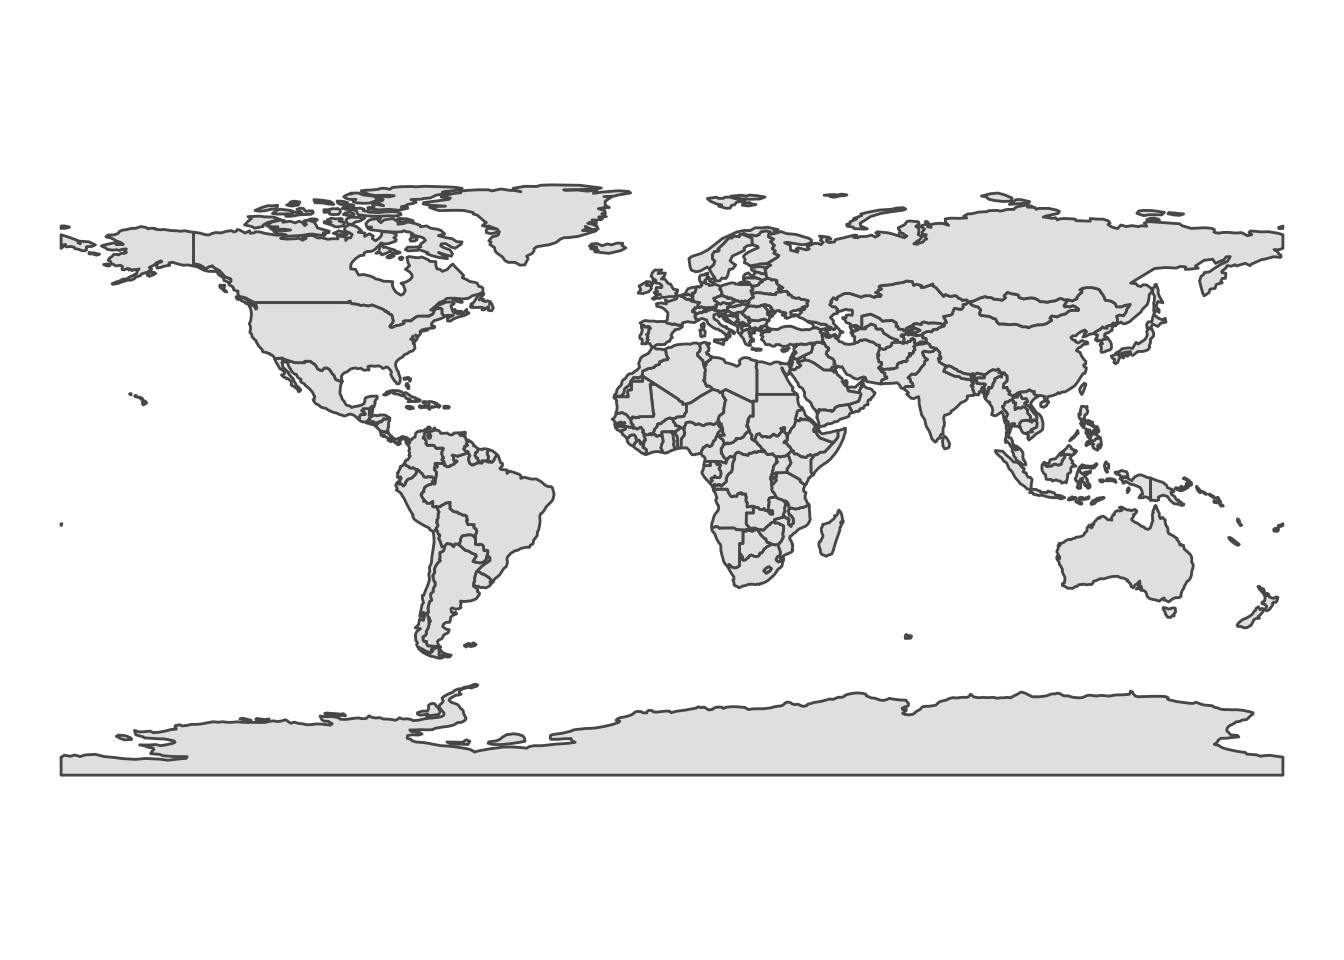 A featureless map of the world, with countries outlined in grey and shaded light grey. Oceans and seas are white.